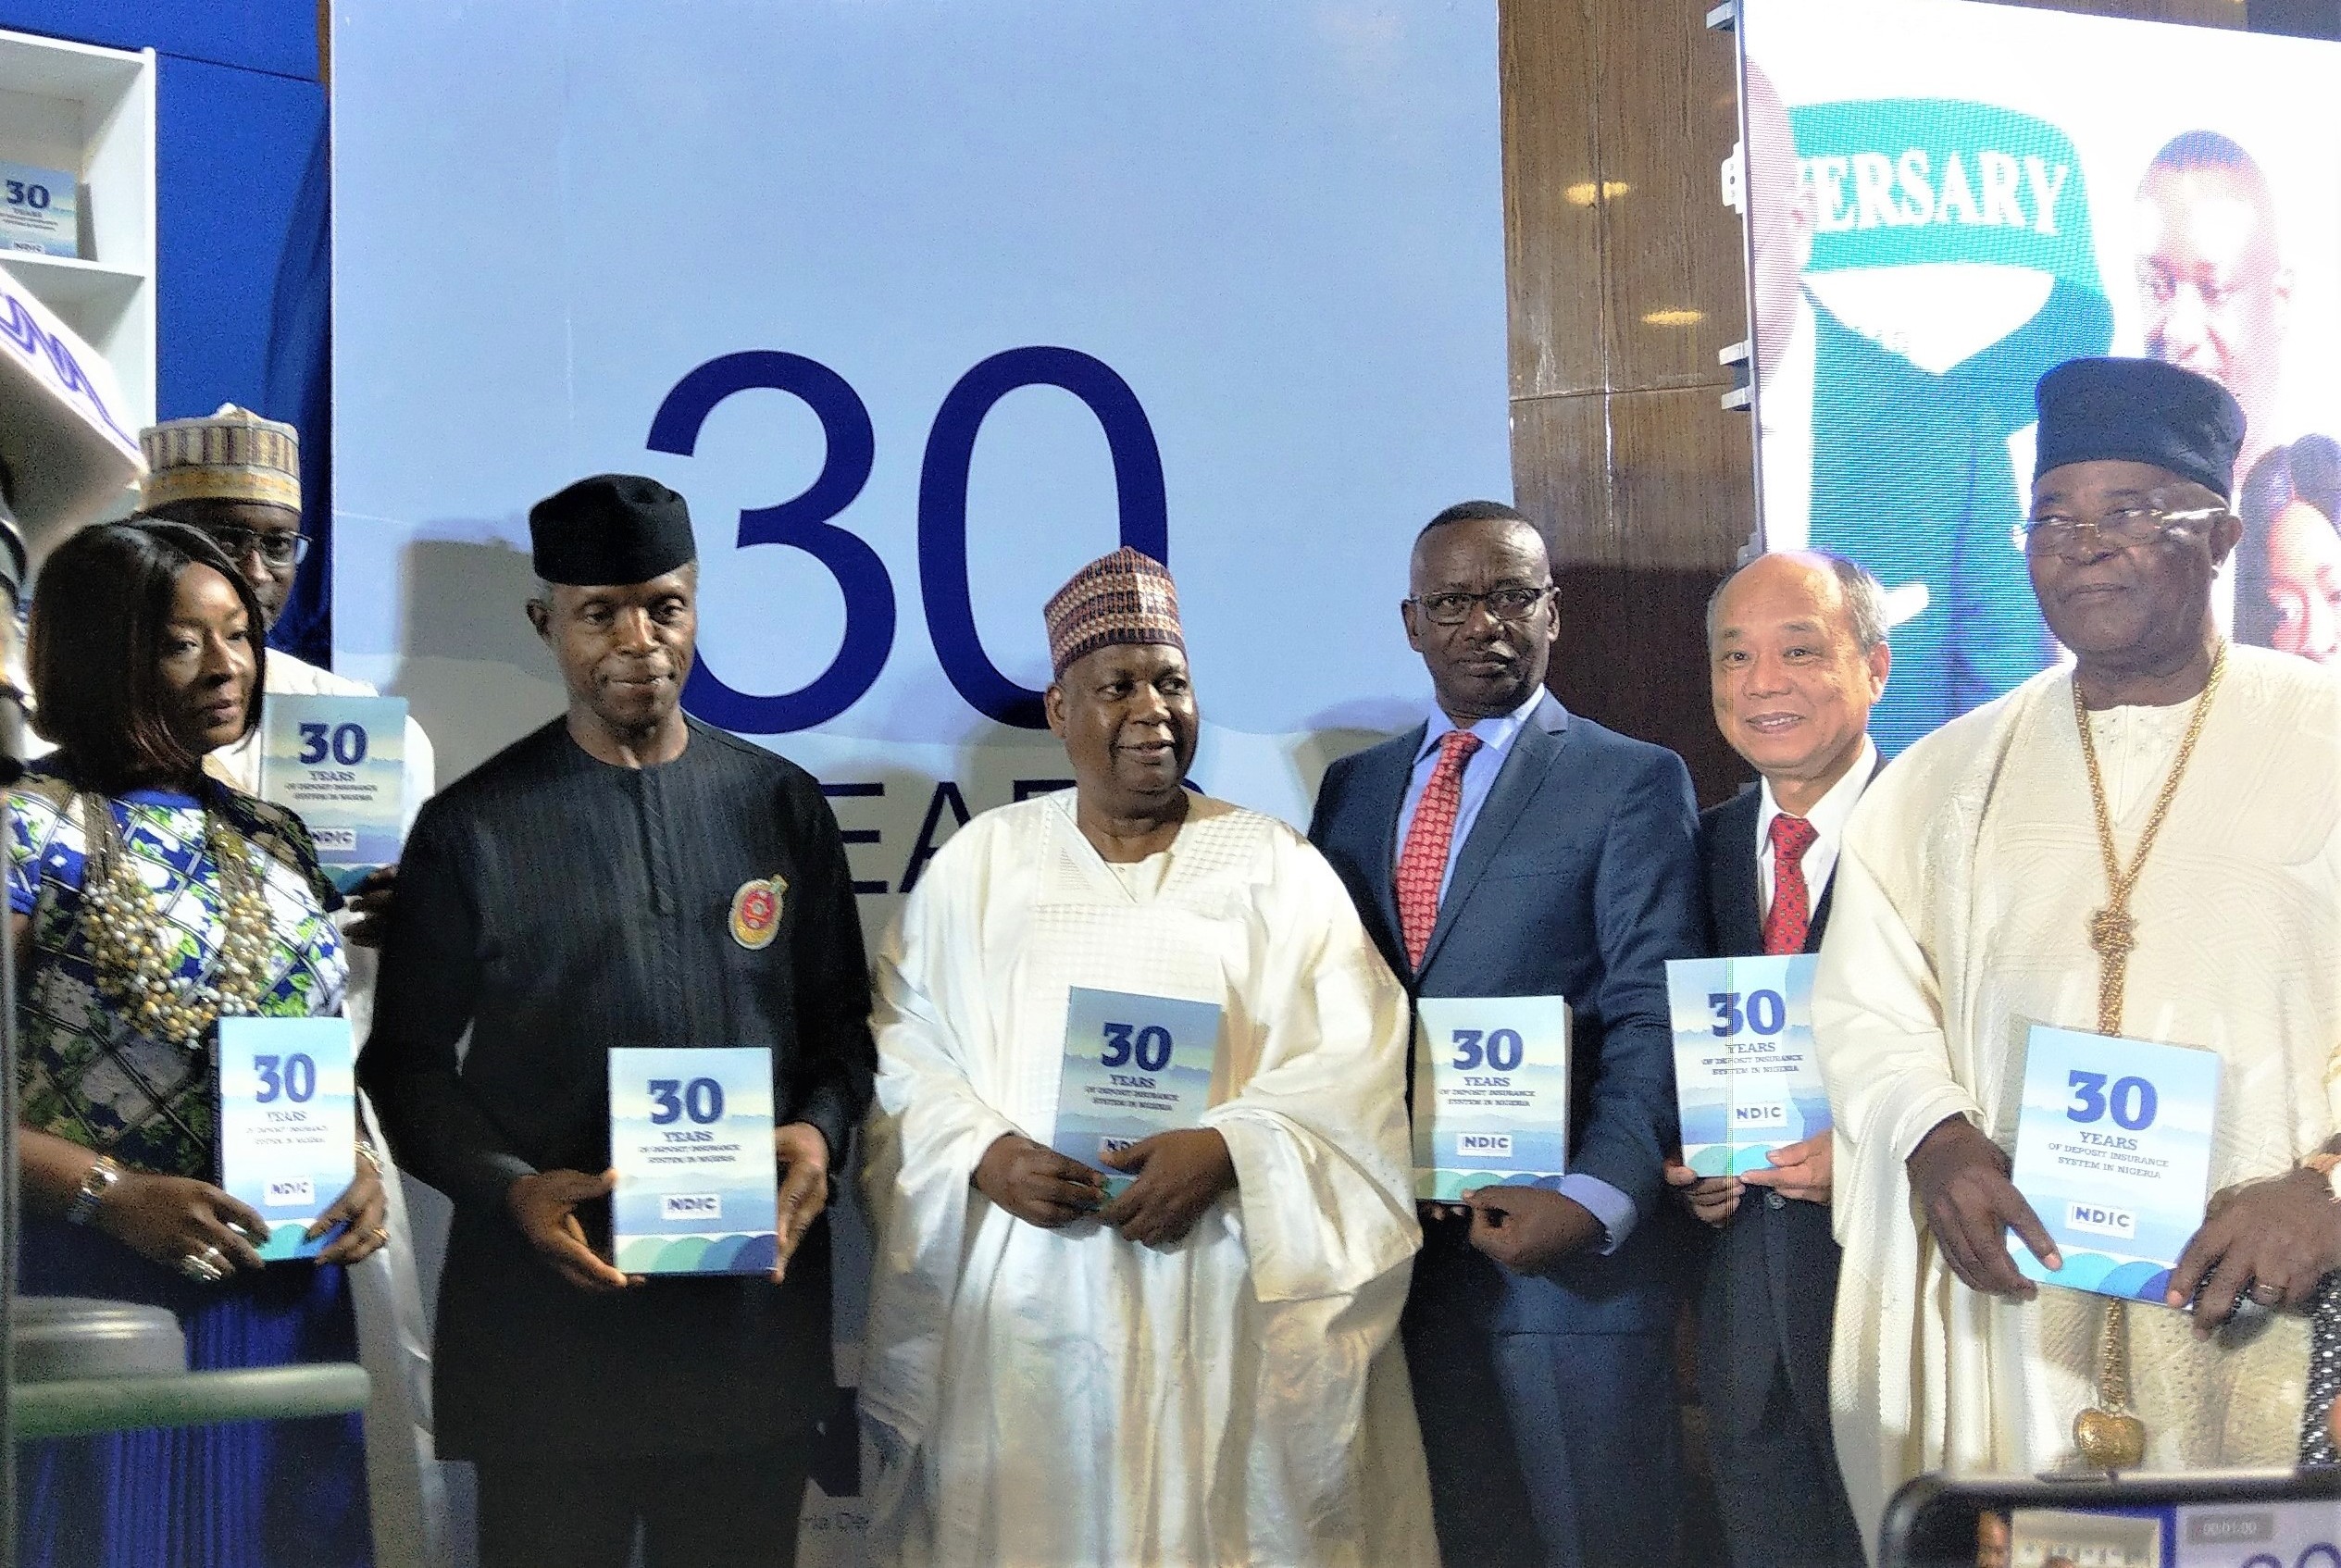 CDIC Chairman Michael Lin led a delegation to attend the 30th Anniversary of the Nigeria Deposit Insurance Corporation （NDIC） and delivered a remark in mid-October 2019